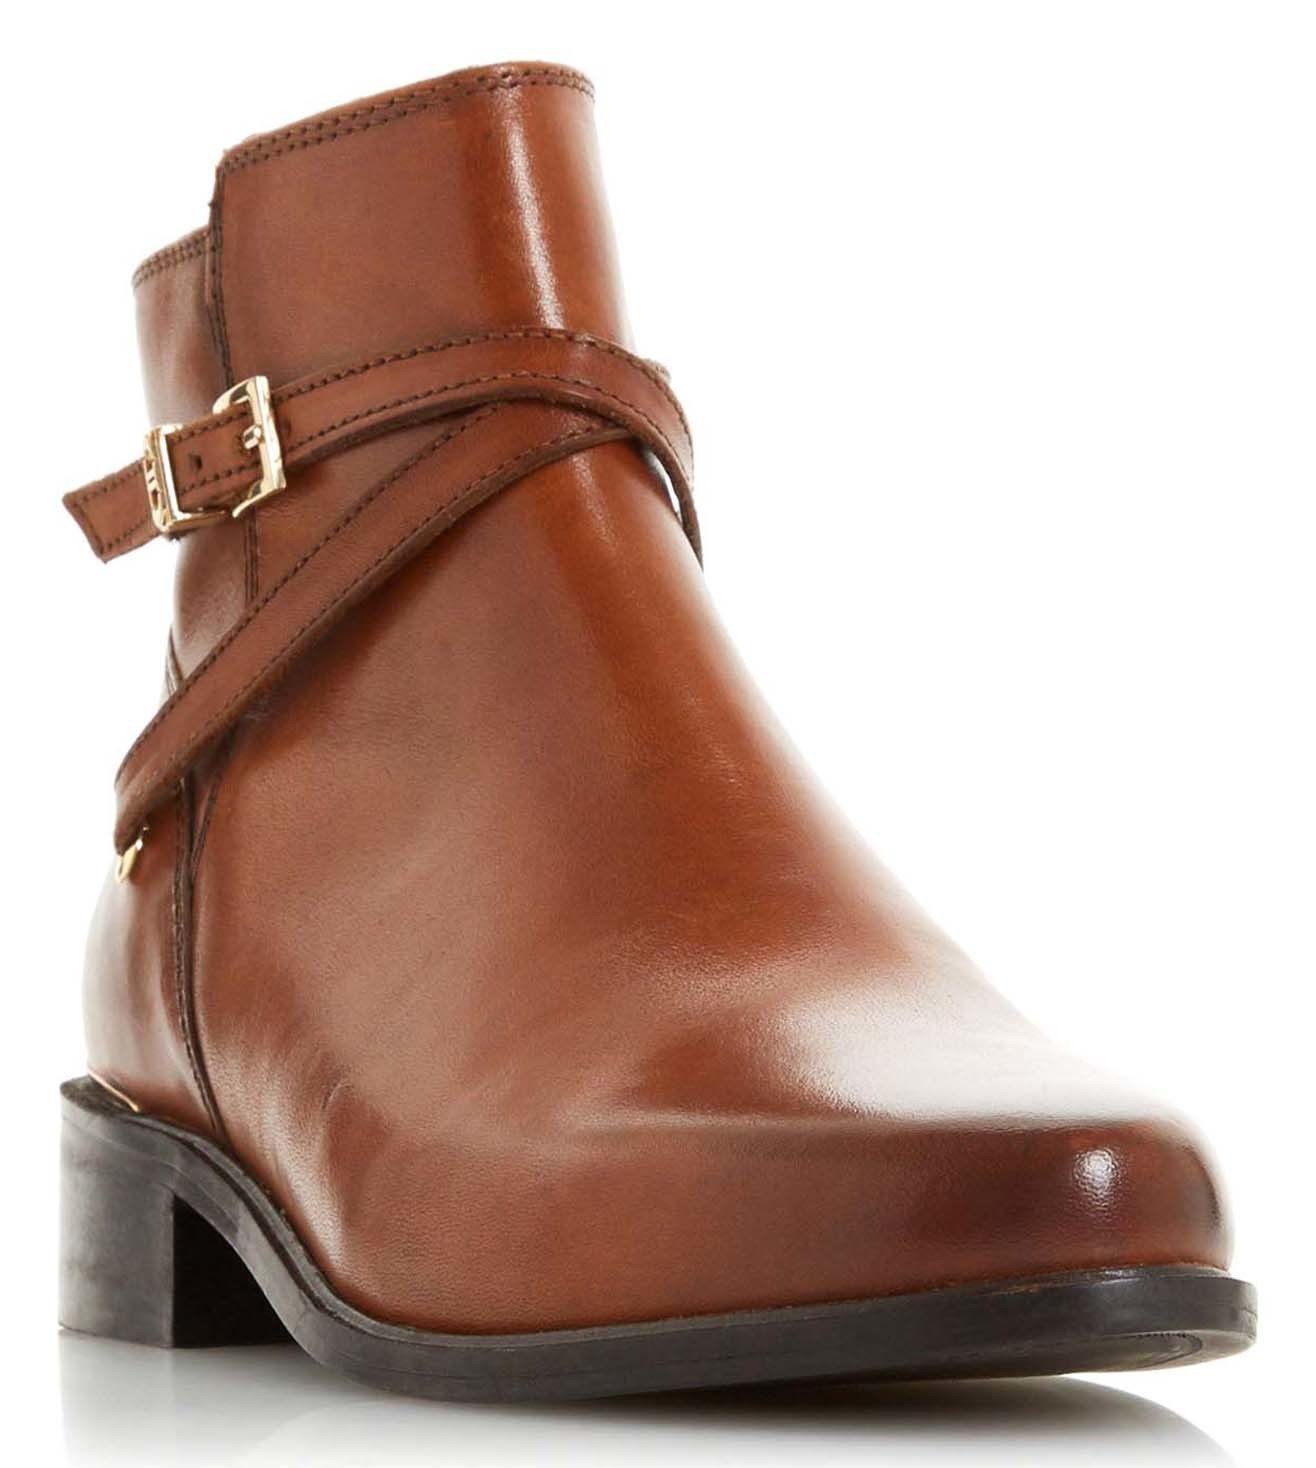 dune ankle boots